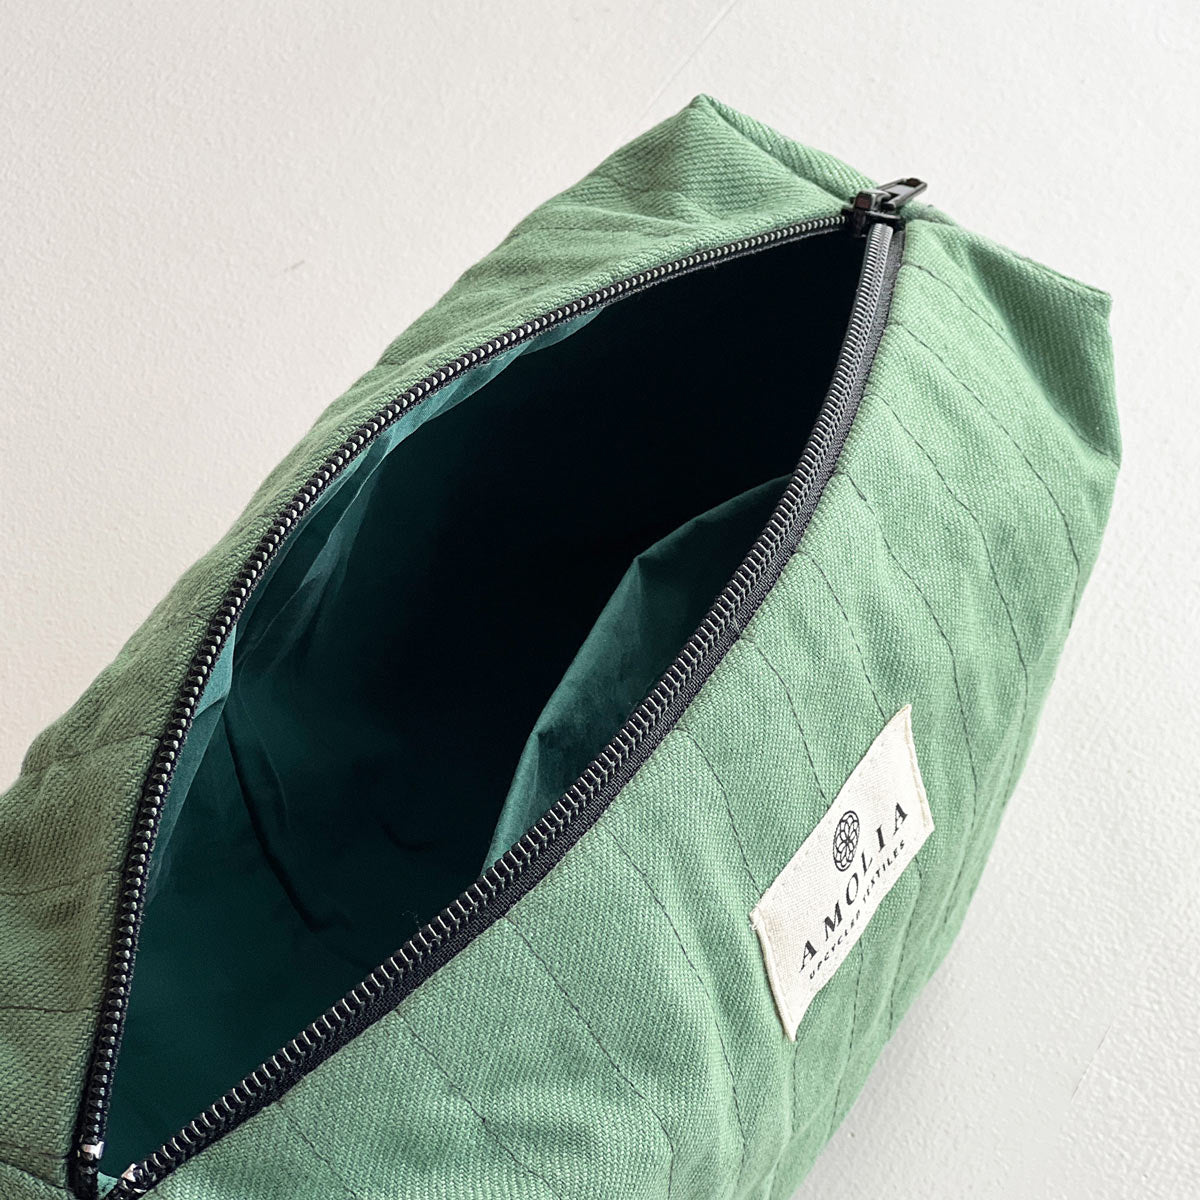 Upcycled toiletry bag, small, green